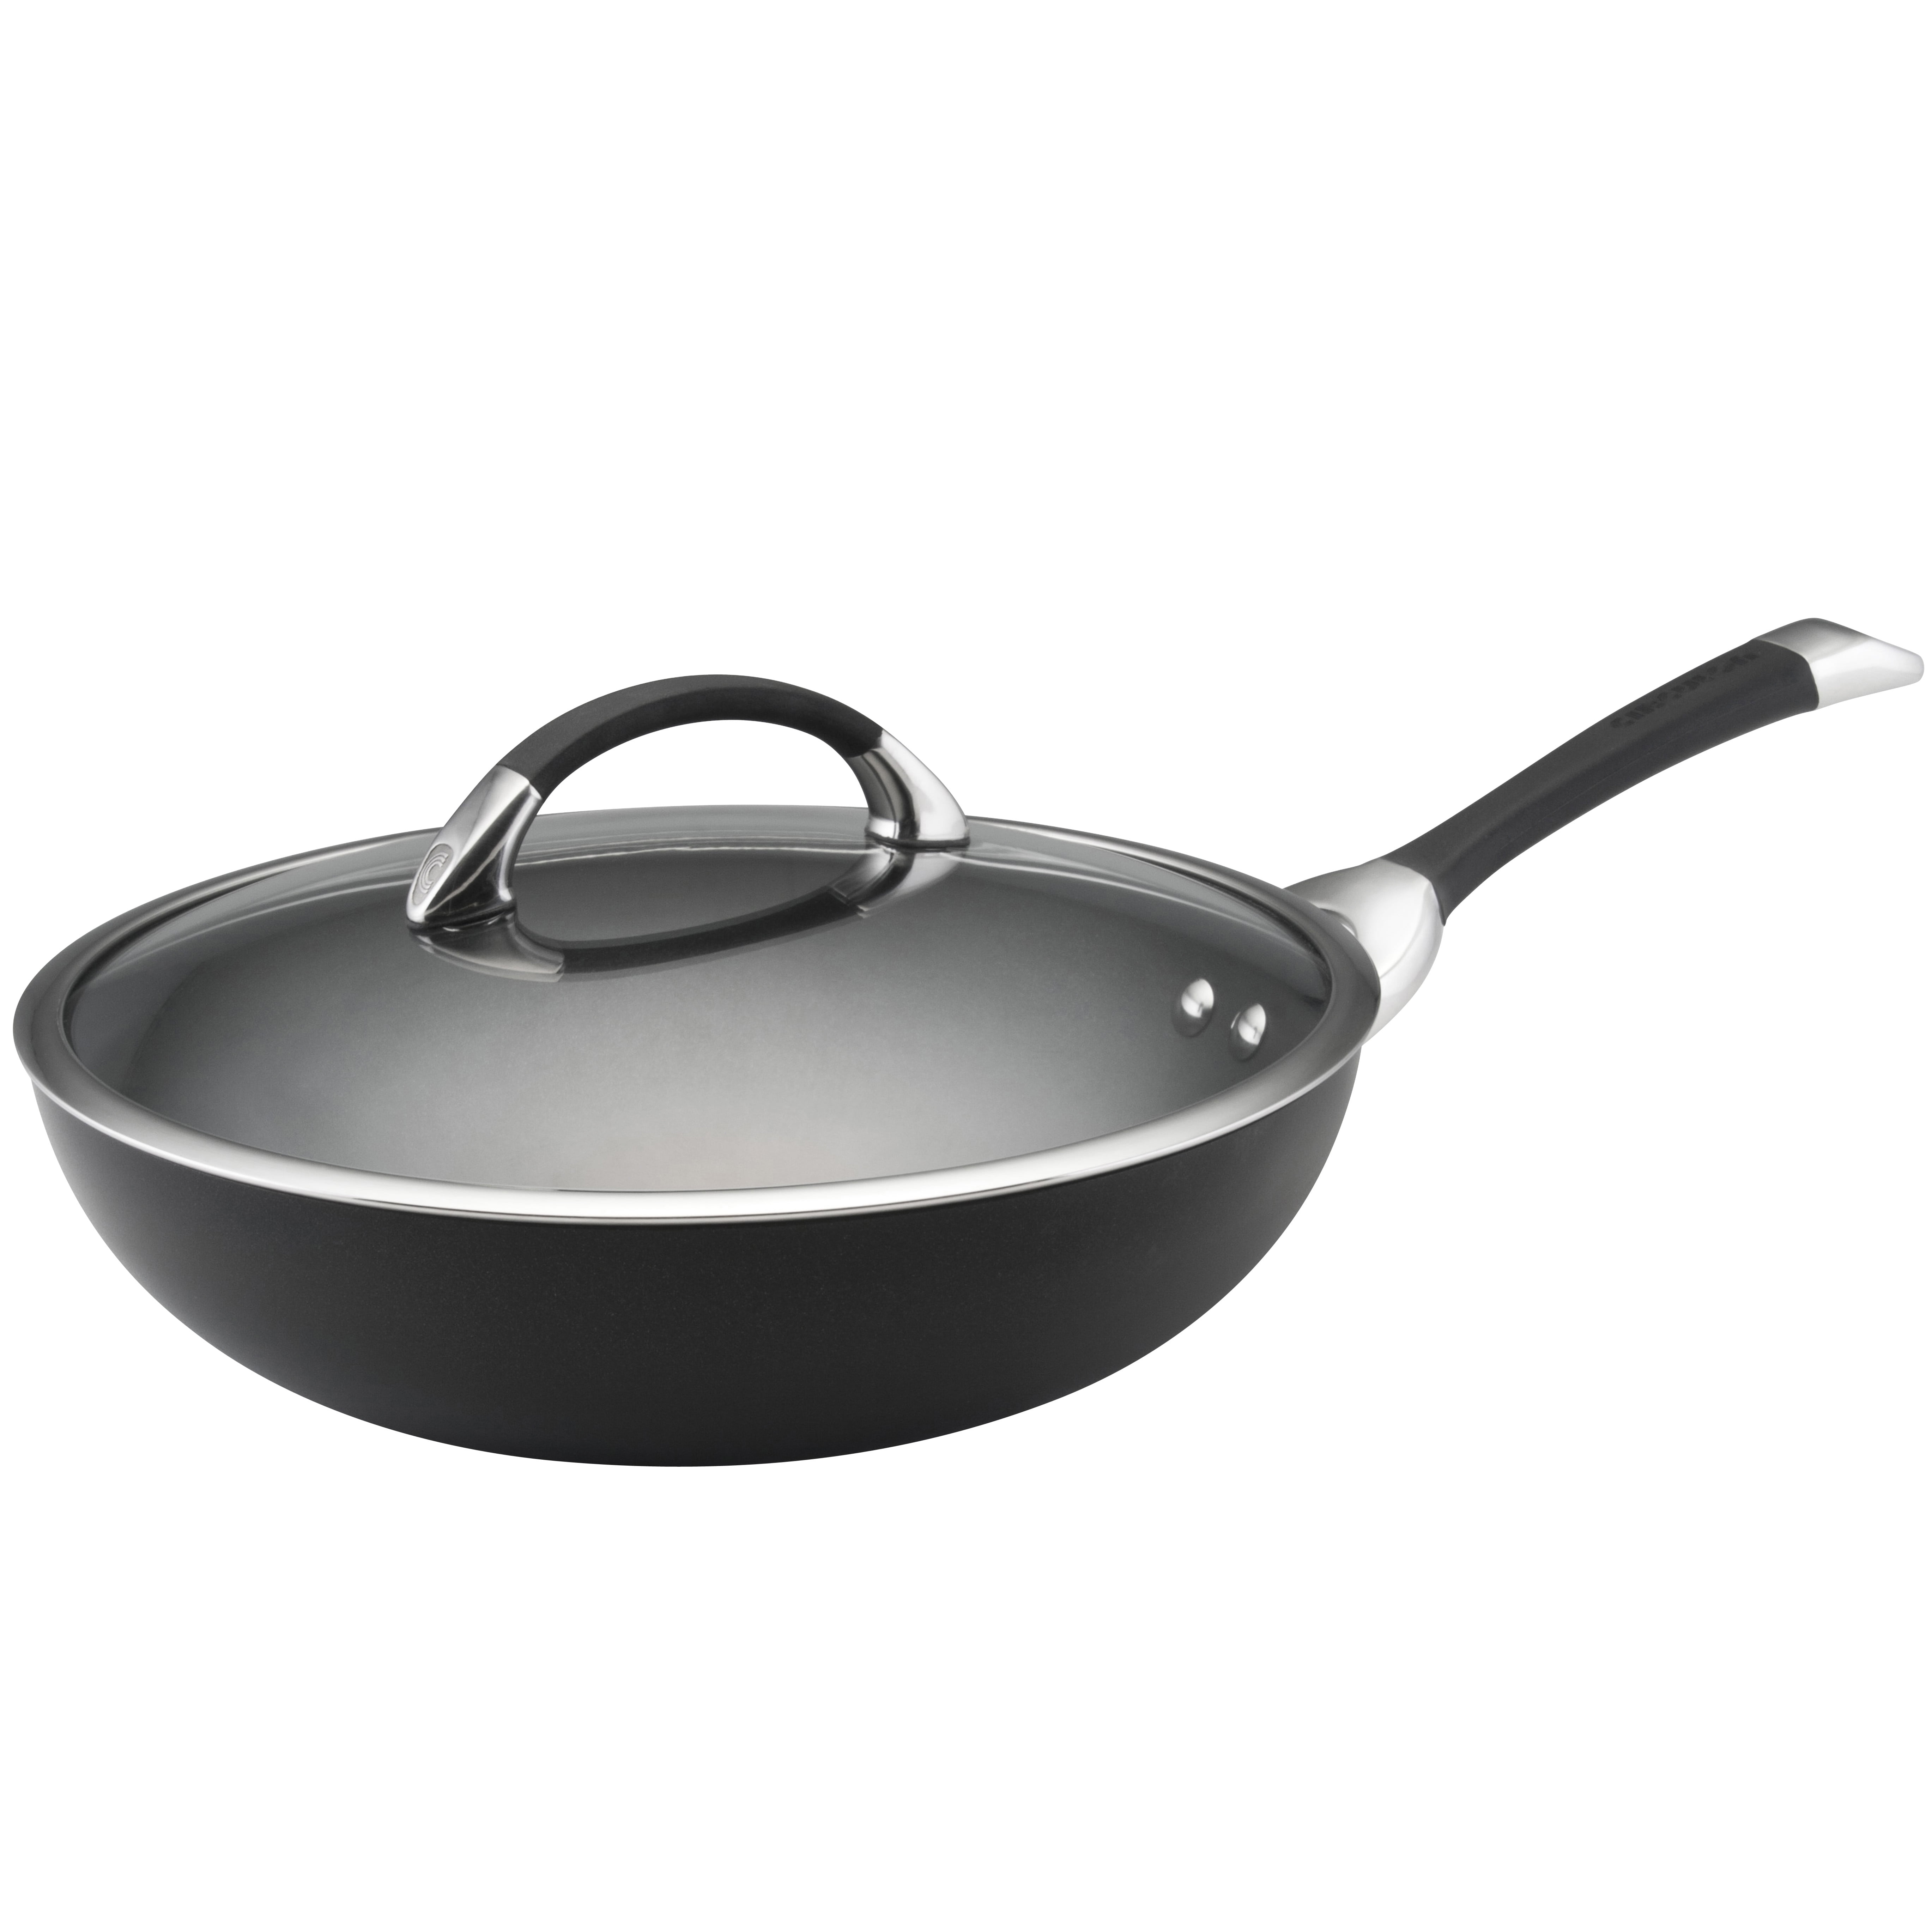 Inch 12 Black Circulon Symmetry Hard-Anodized Nonstick Covered Essential Pan 